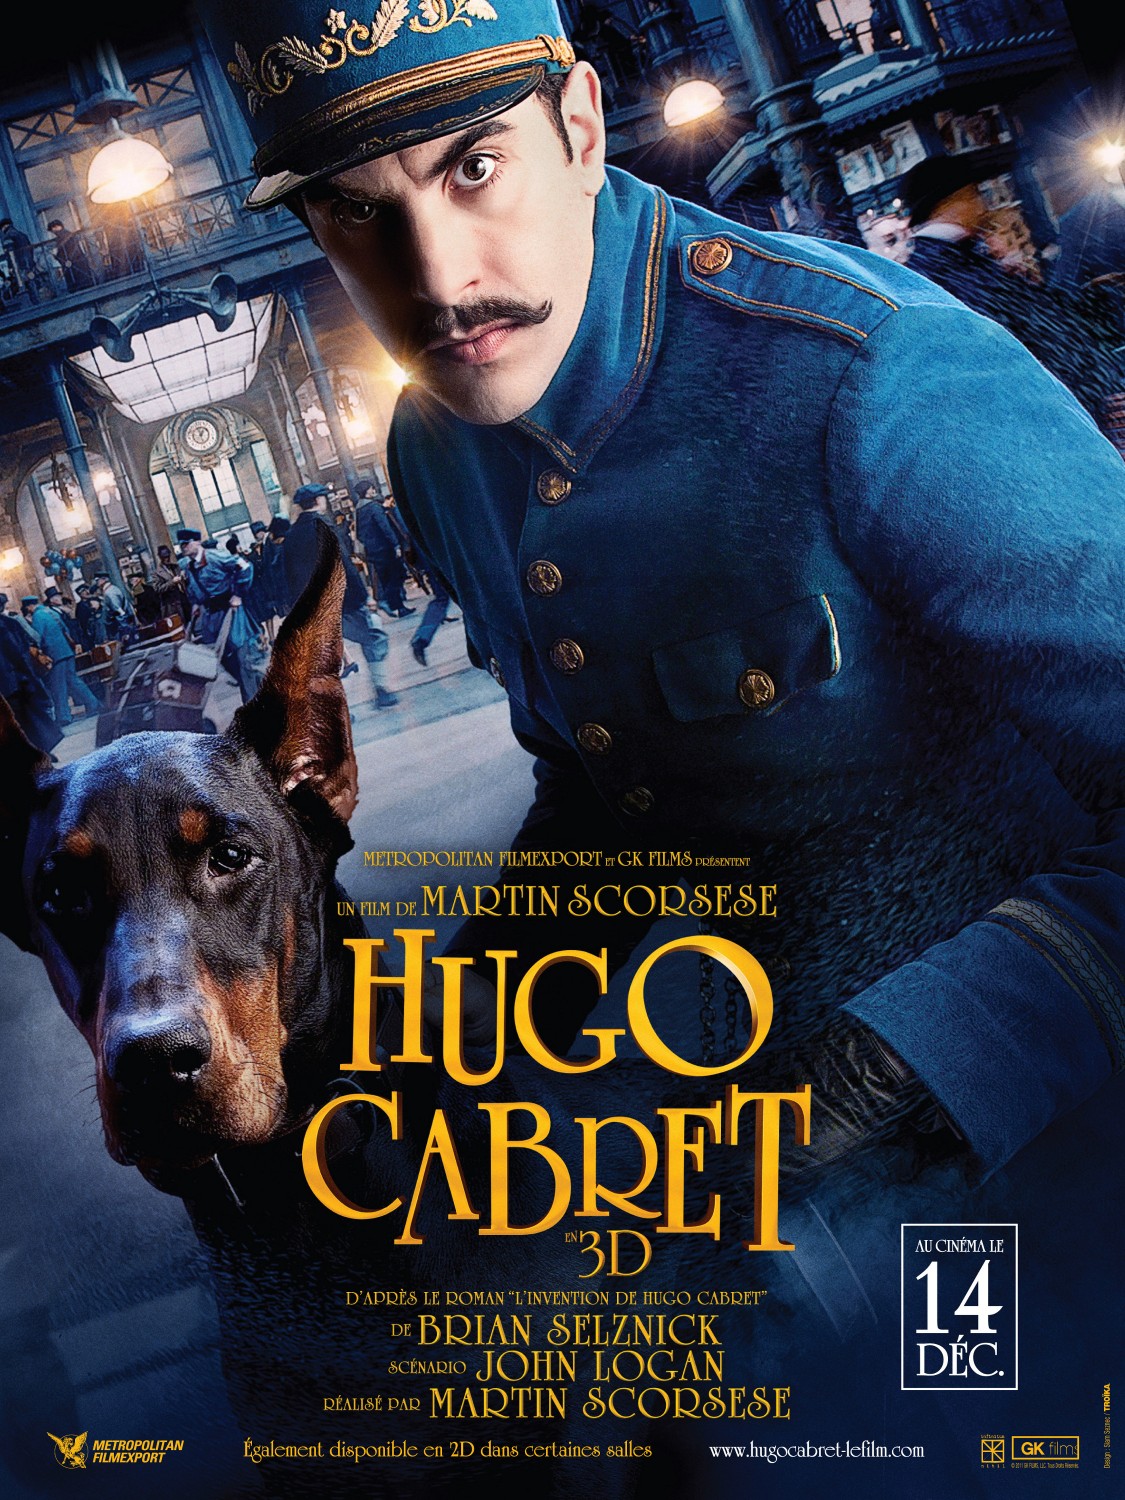 Watch: Four Minutes From Martin Scorsese's 'Hugo'; Five Posters and Q&A